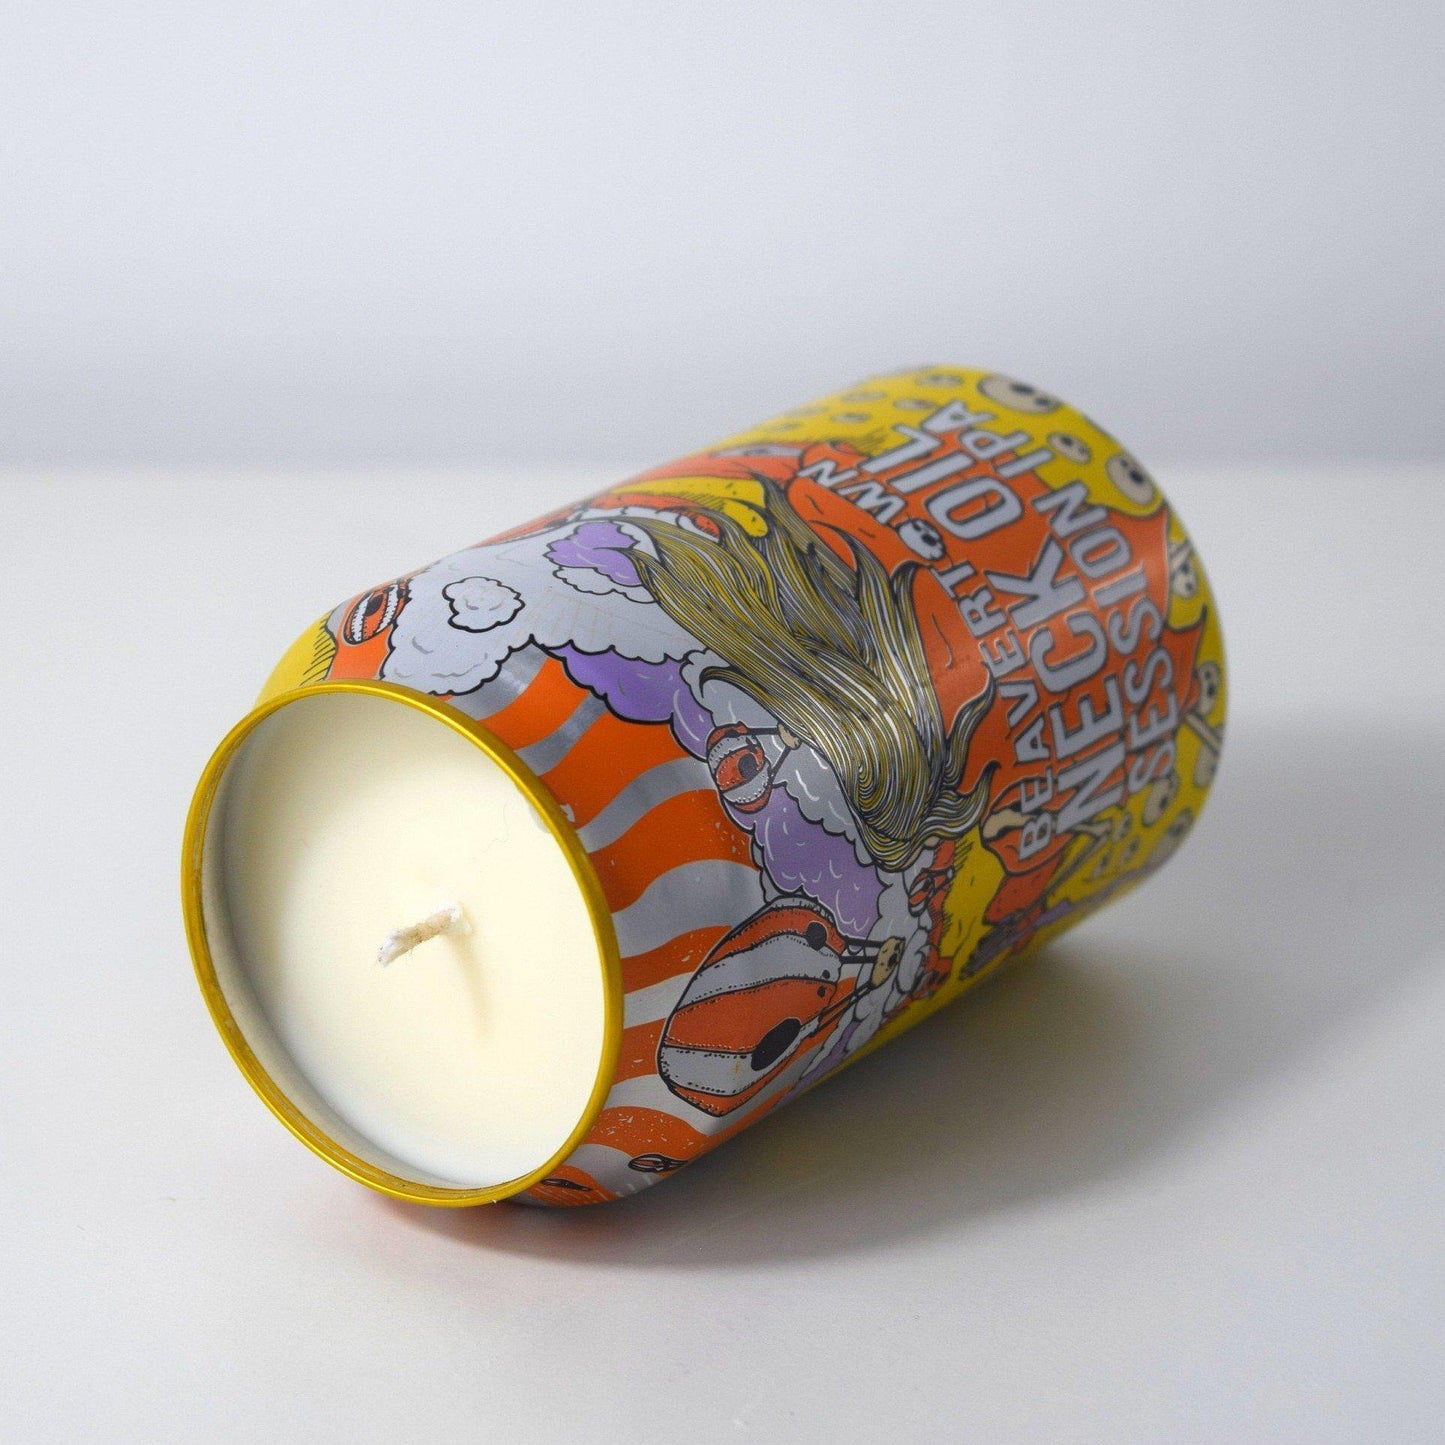 Beavertown Neck Oil Beer Can Candle Beer & Ale Can Candles Adhock Homeware